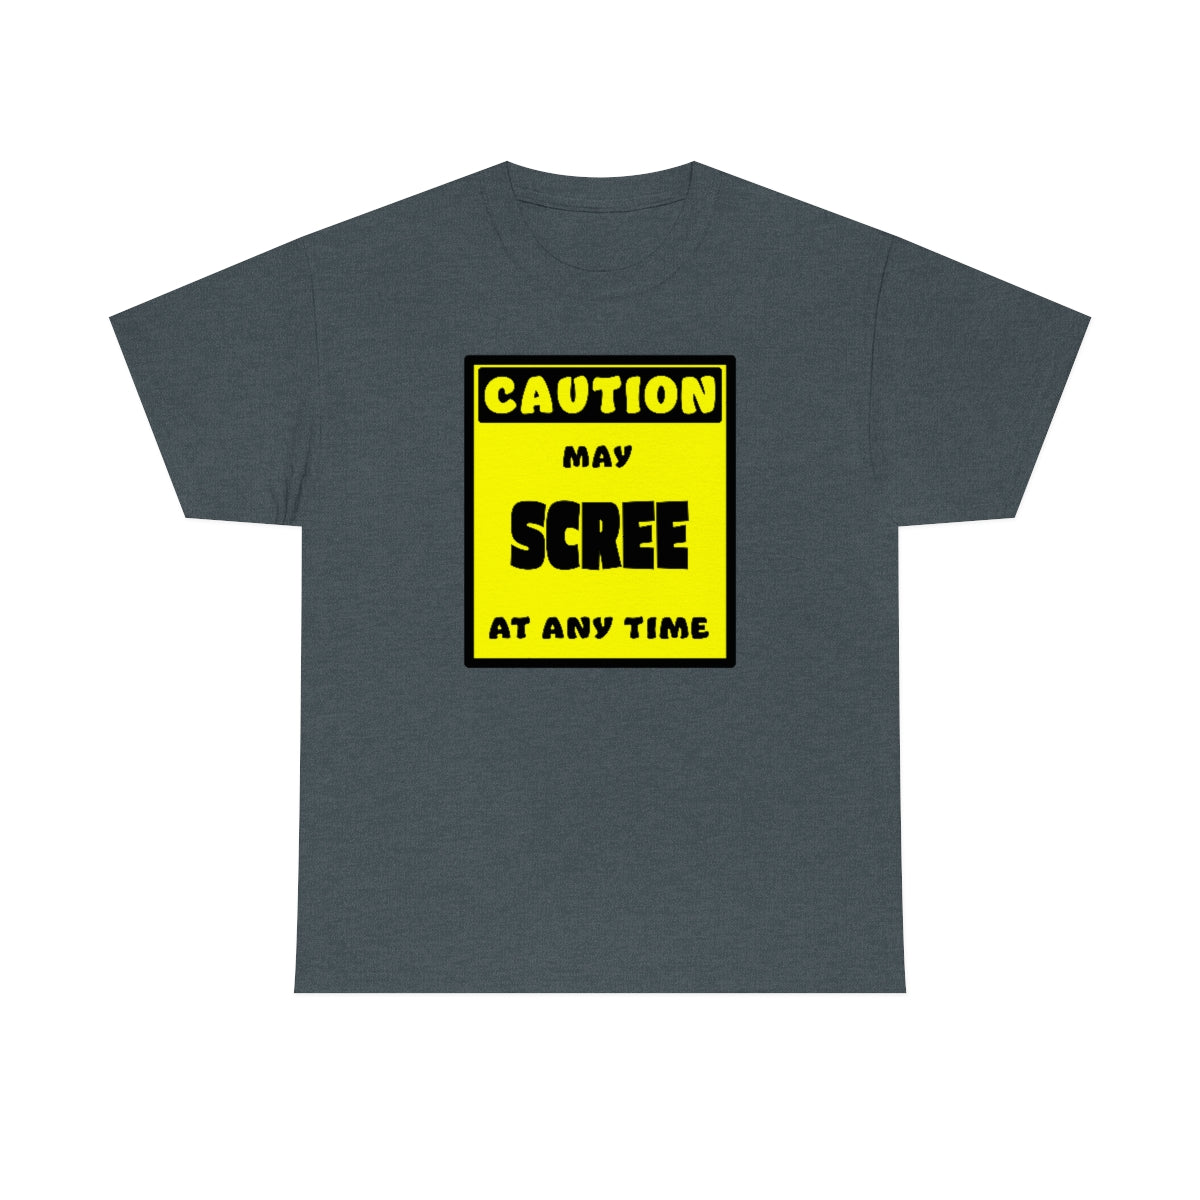 CAUTION! May SCREE at any time! - T-Shirt T-Shirt AFLT-Whootorca Dark Heather S 